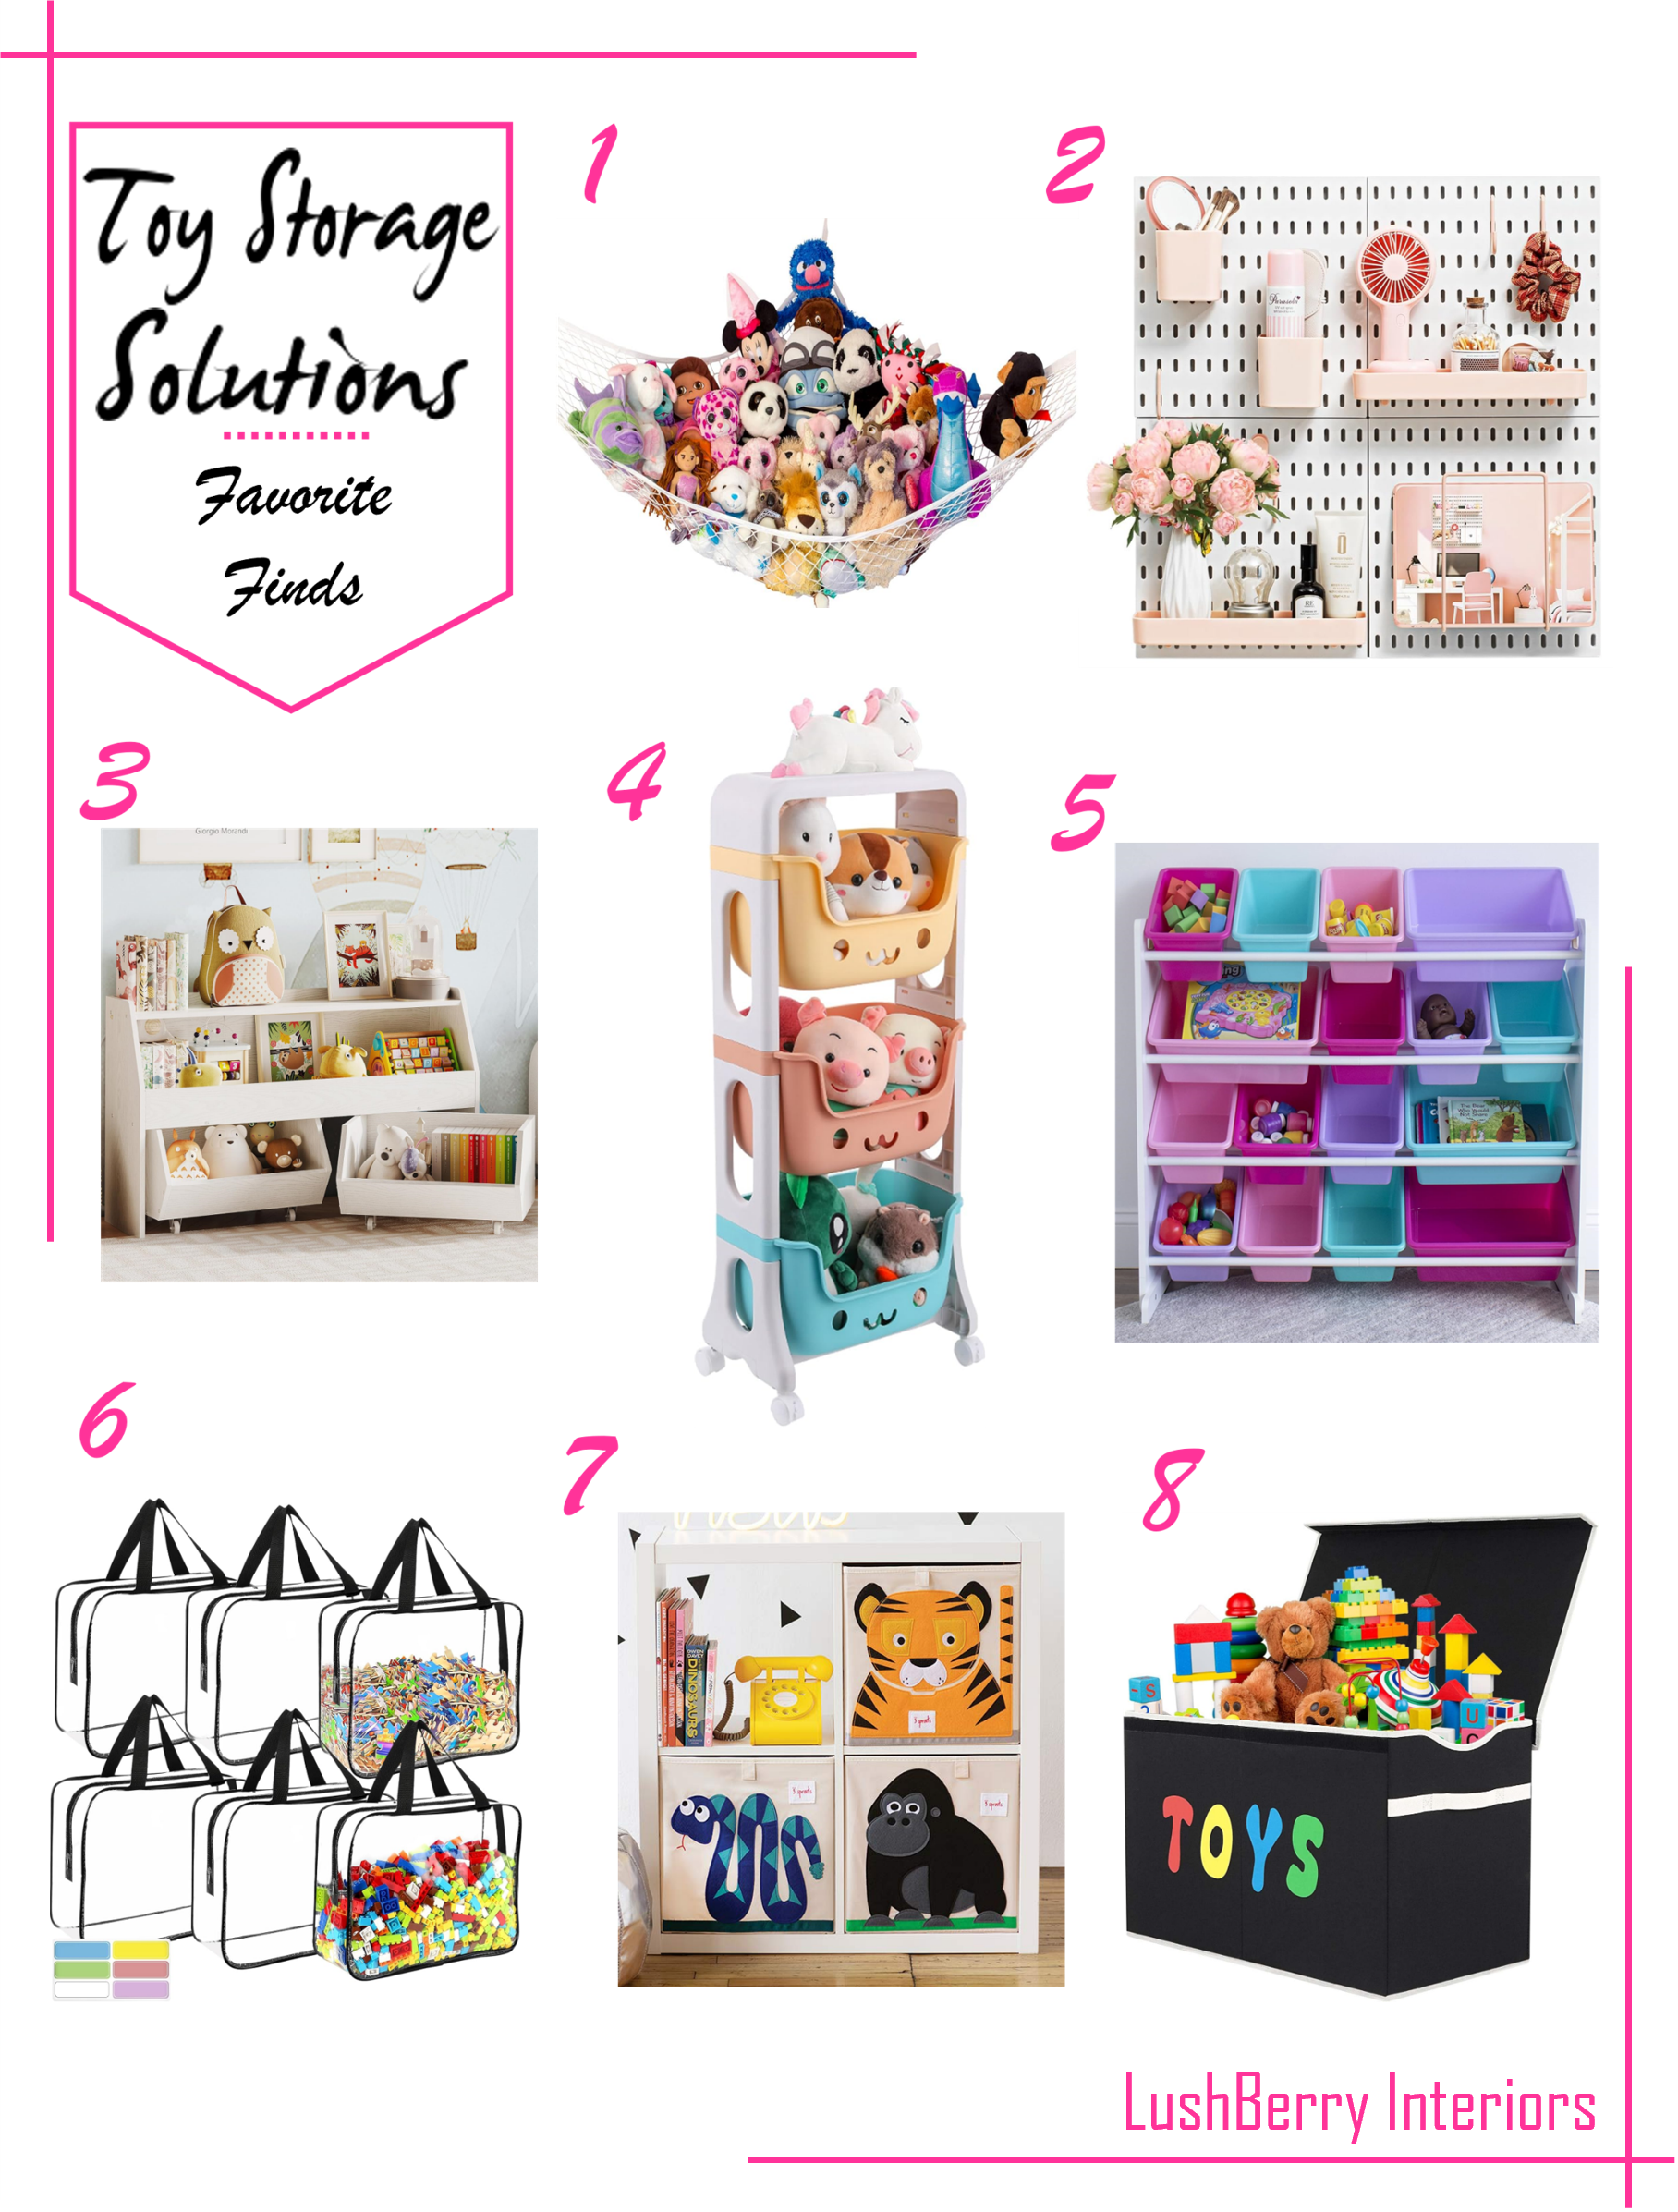 Favorite Finds for Toy Storage